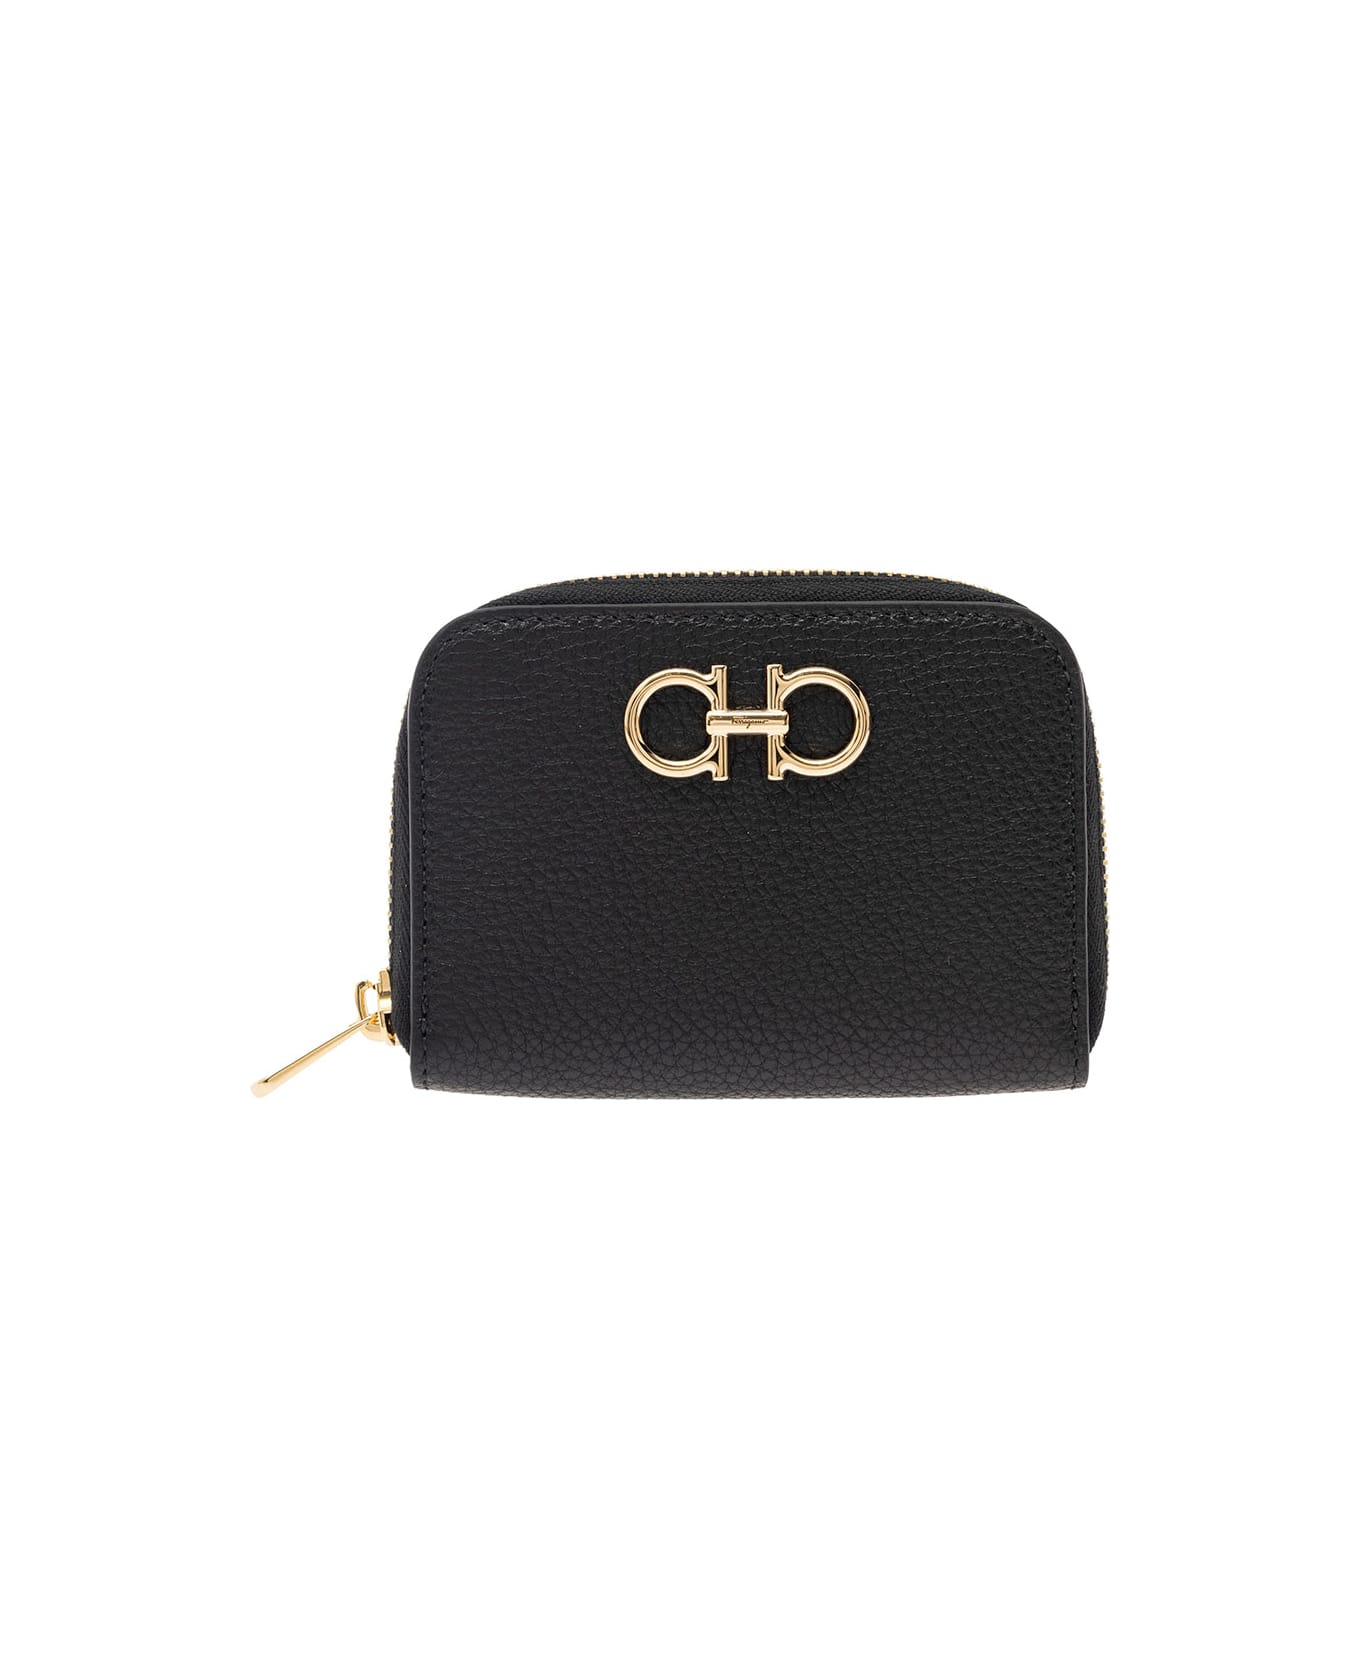 Ferragamo Black Coin Purse With Gancino Logo In Hammered Leaher Woman - Black アクセサリー